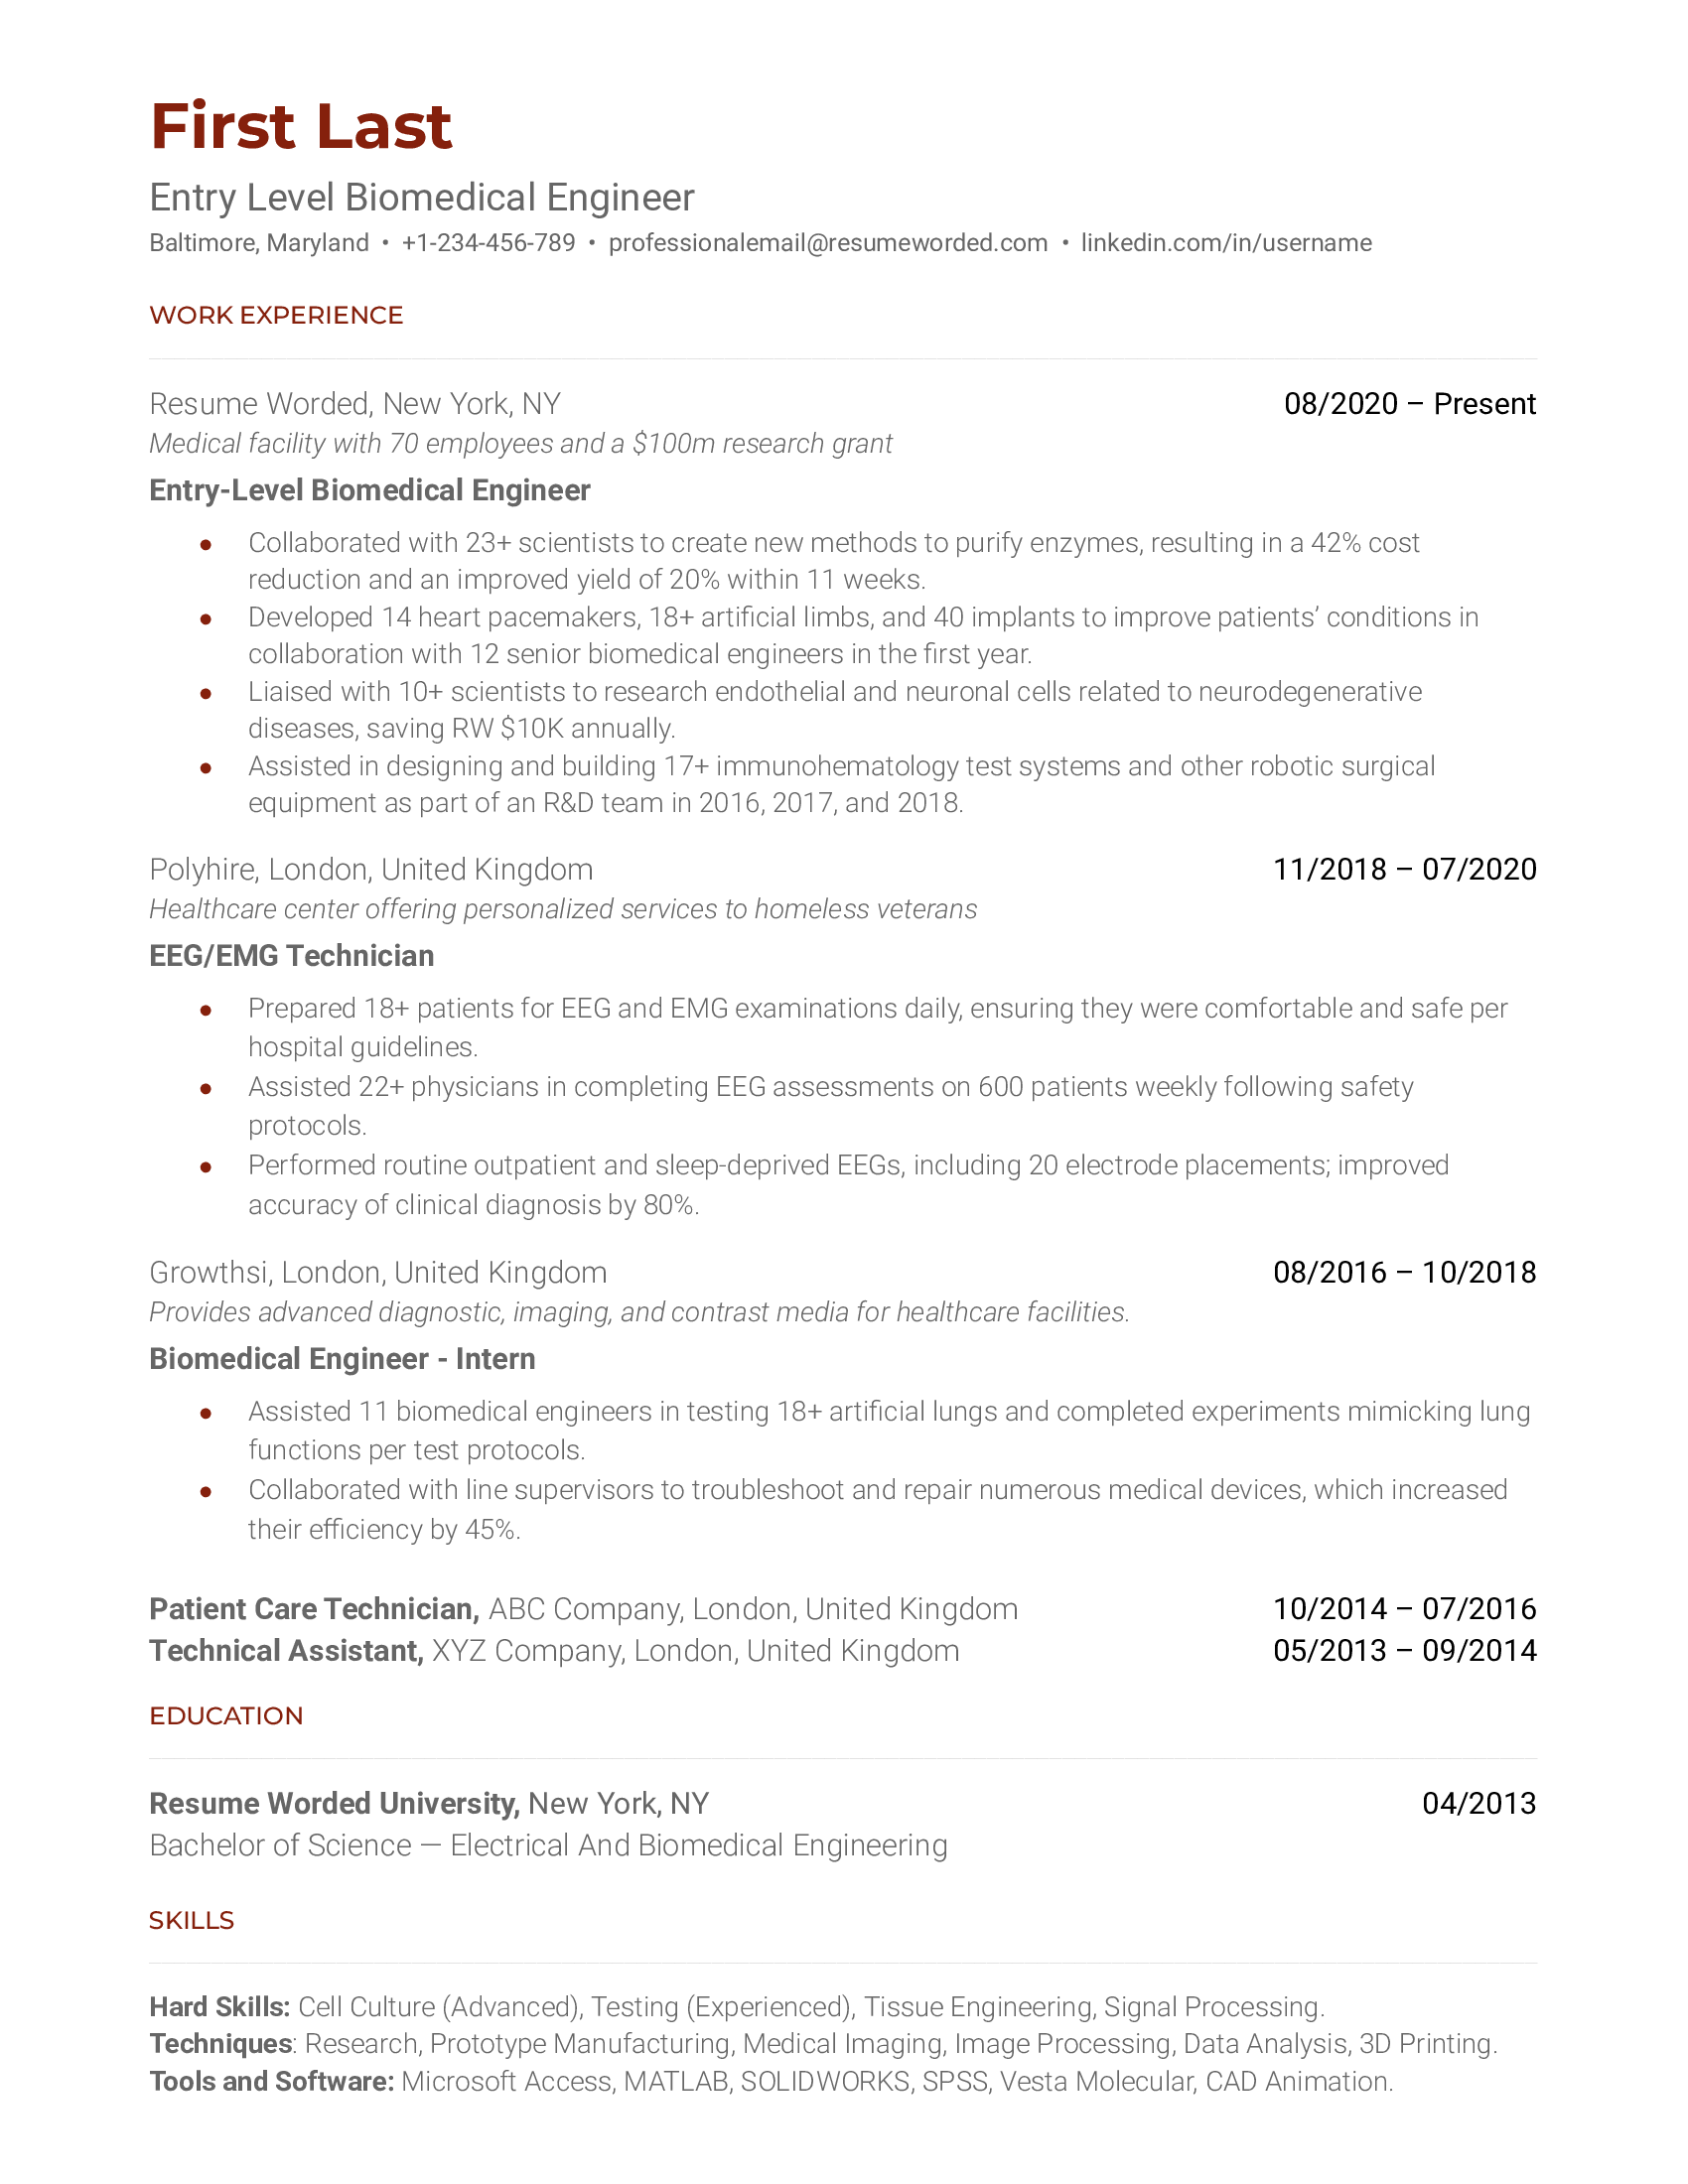 An entry-level biomedical engineer resume template that includes internship experience.